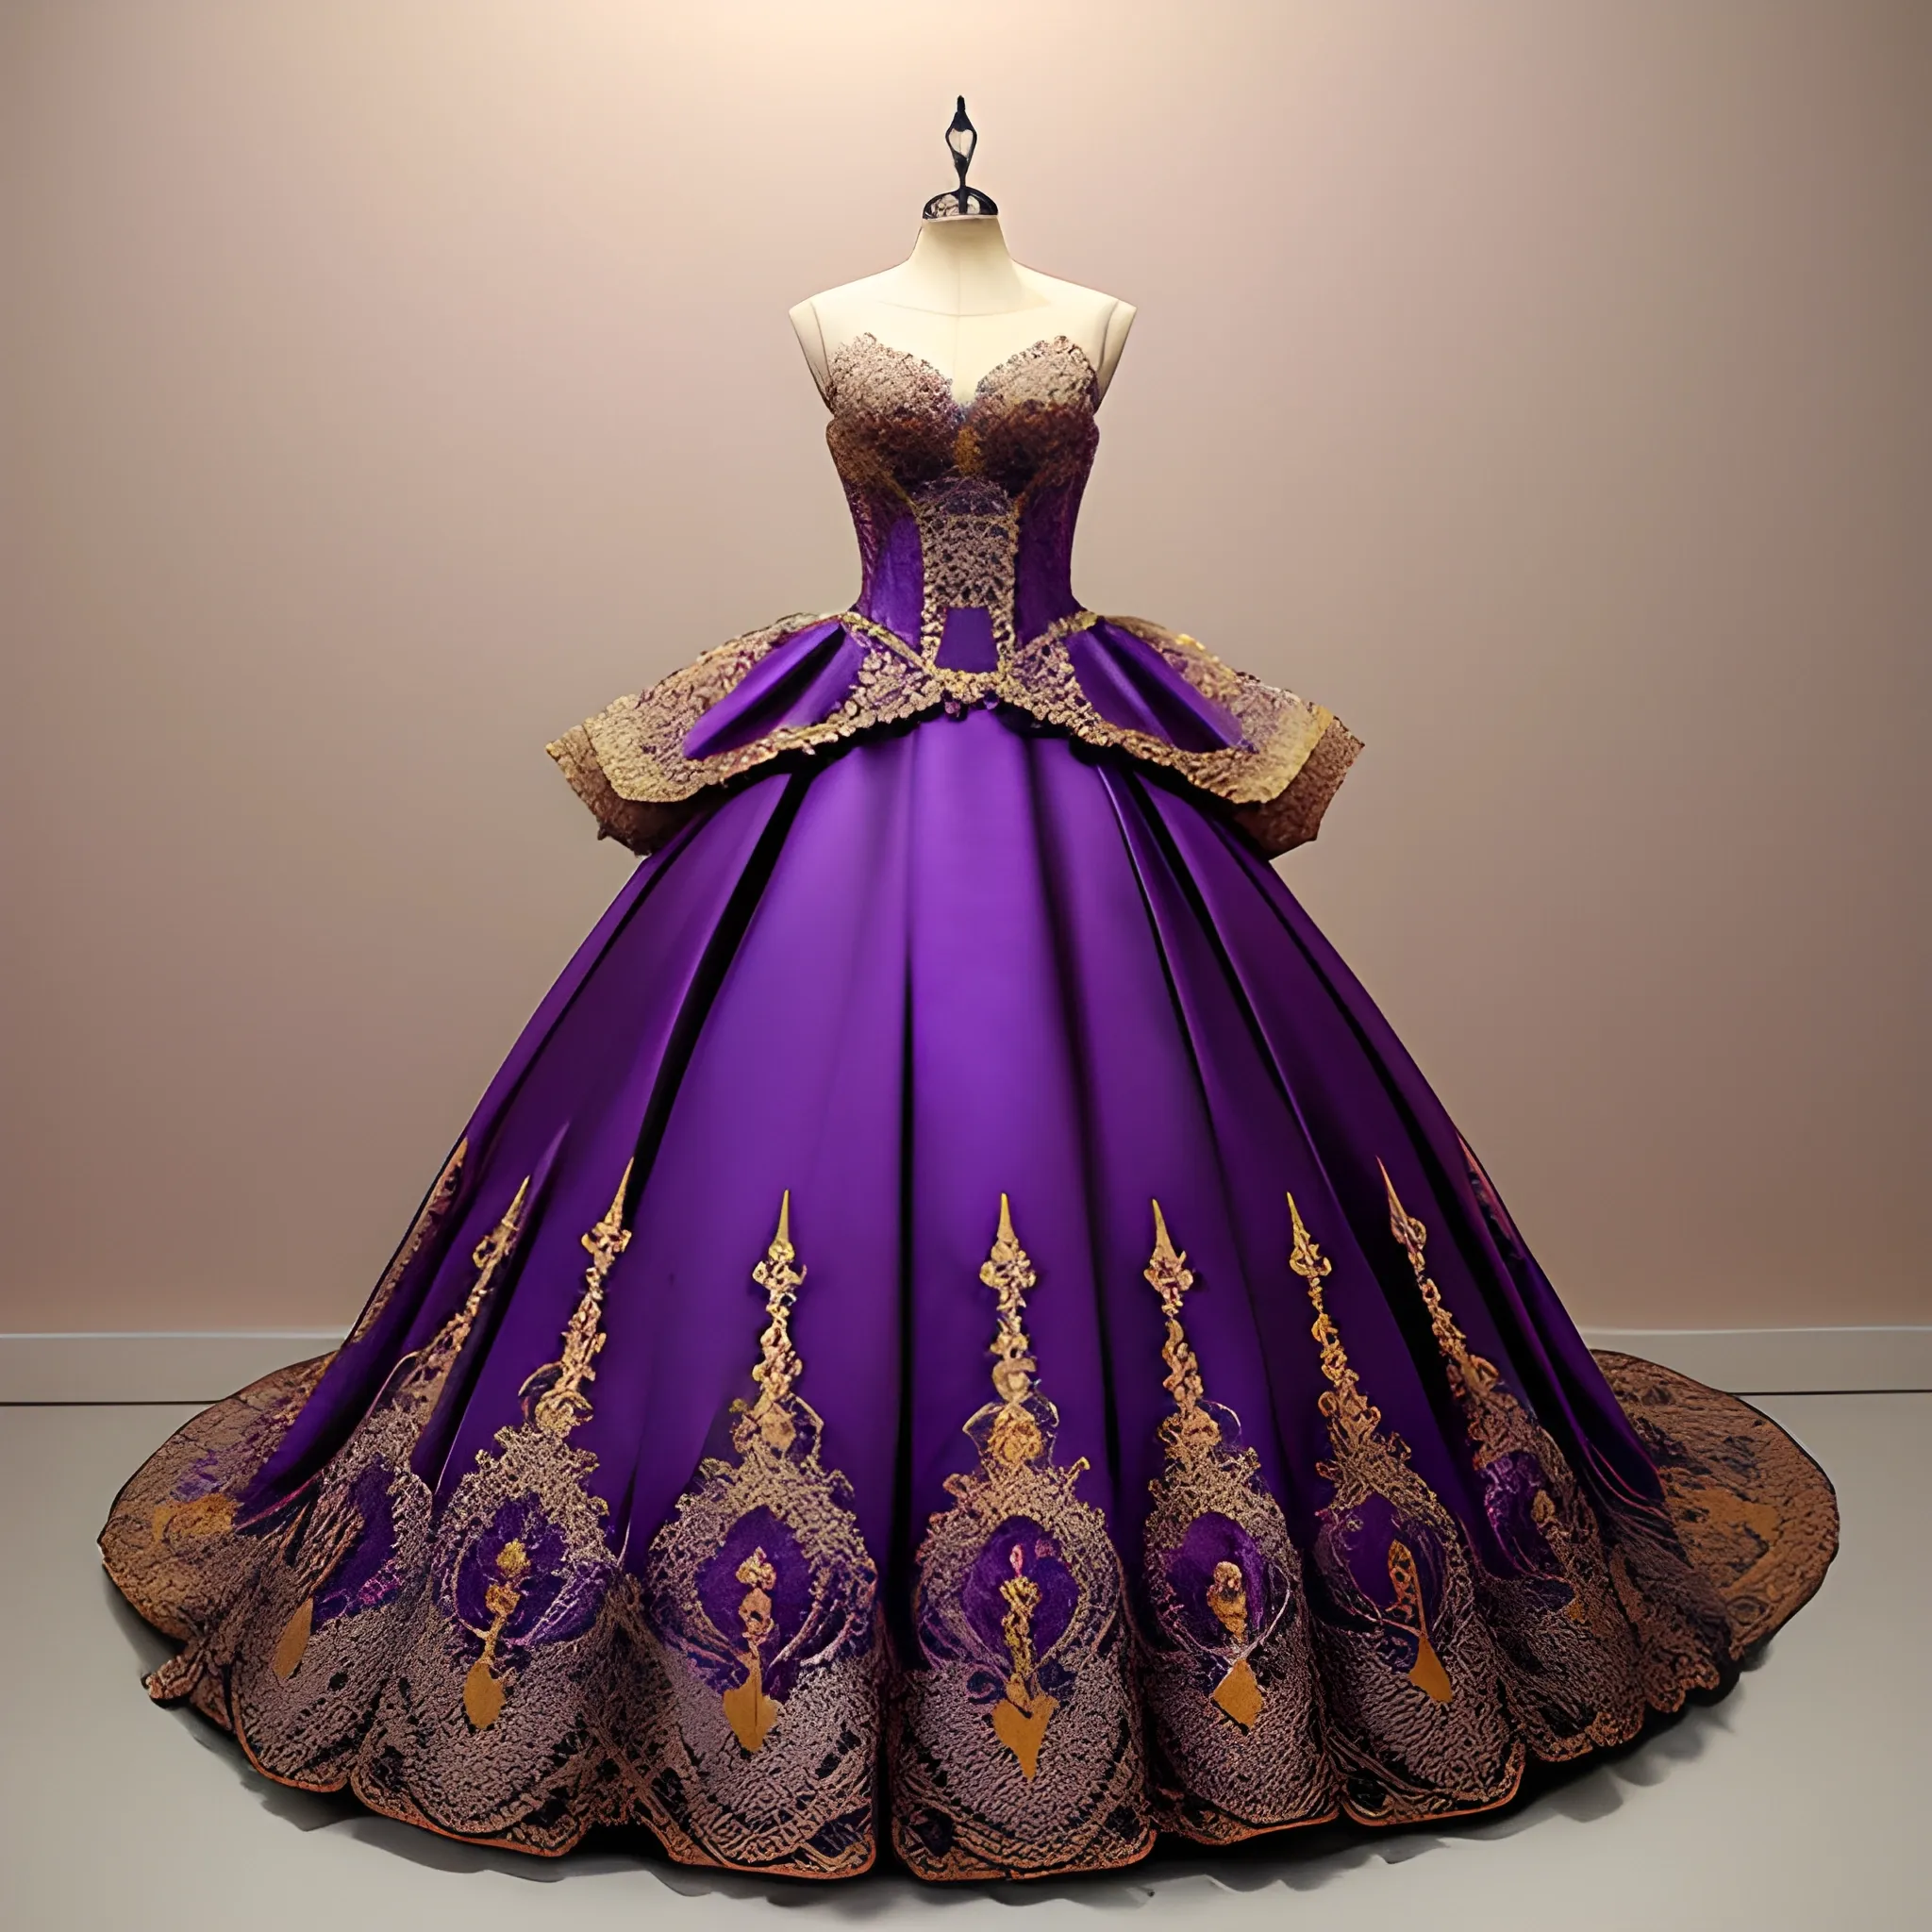 Intricate fantasy wedding gown purple and gold lace